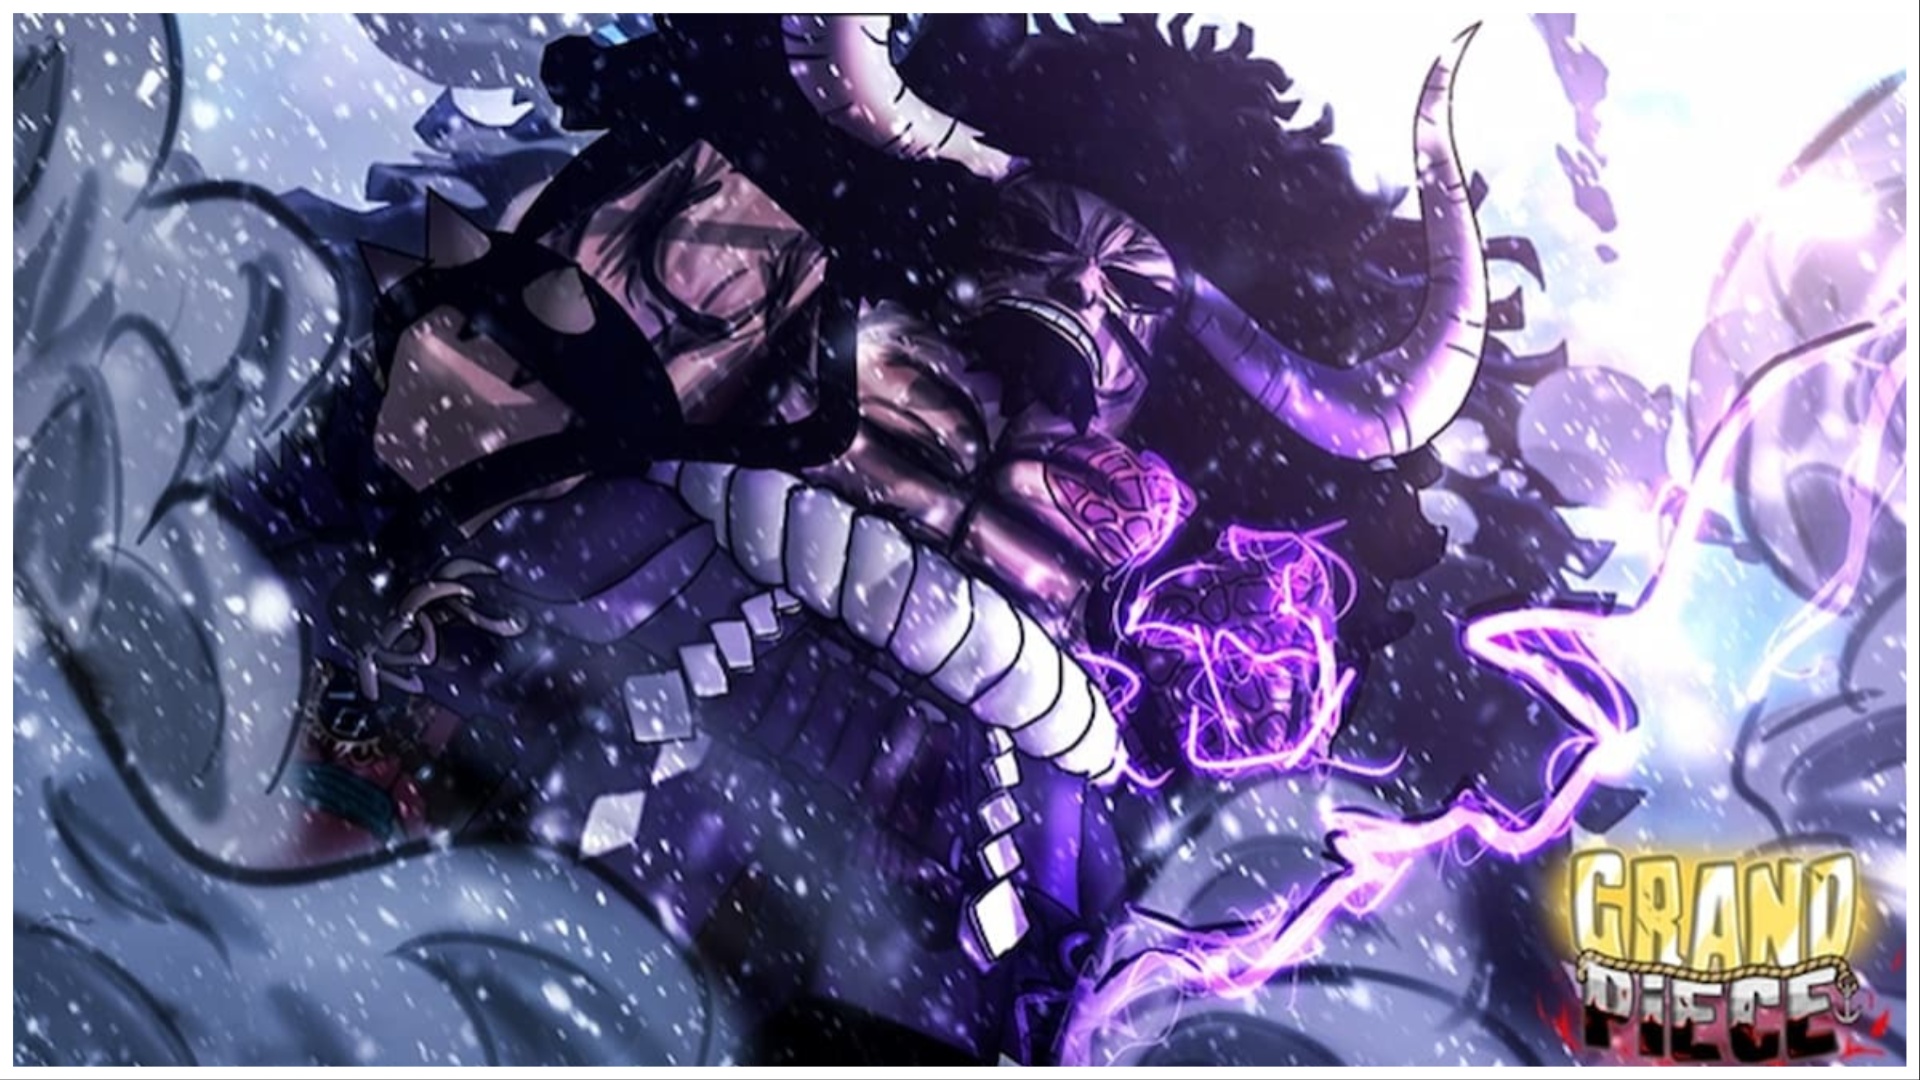 the image shows a burly man with long black hair and striking white horns protruding from either side of his skull looking down on the viewer. He is surrounded by purple lightning